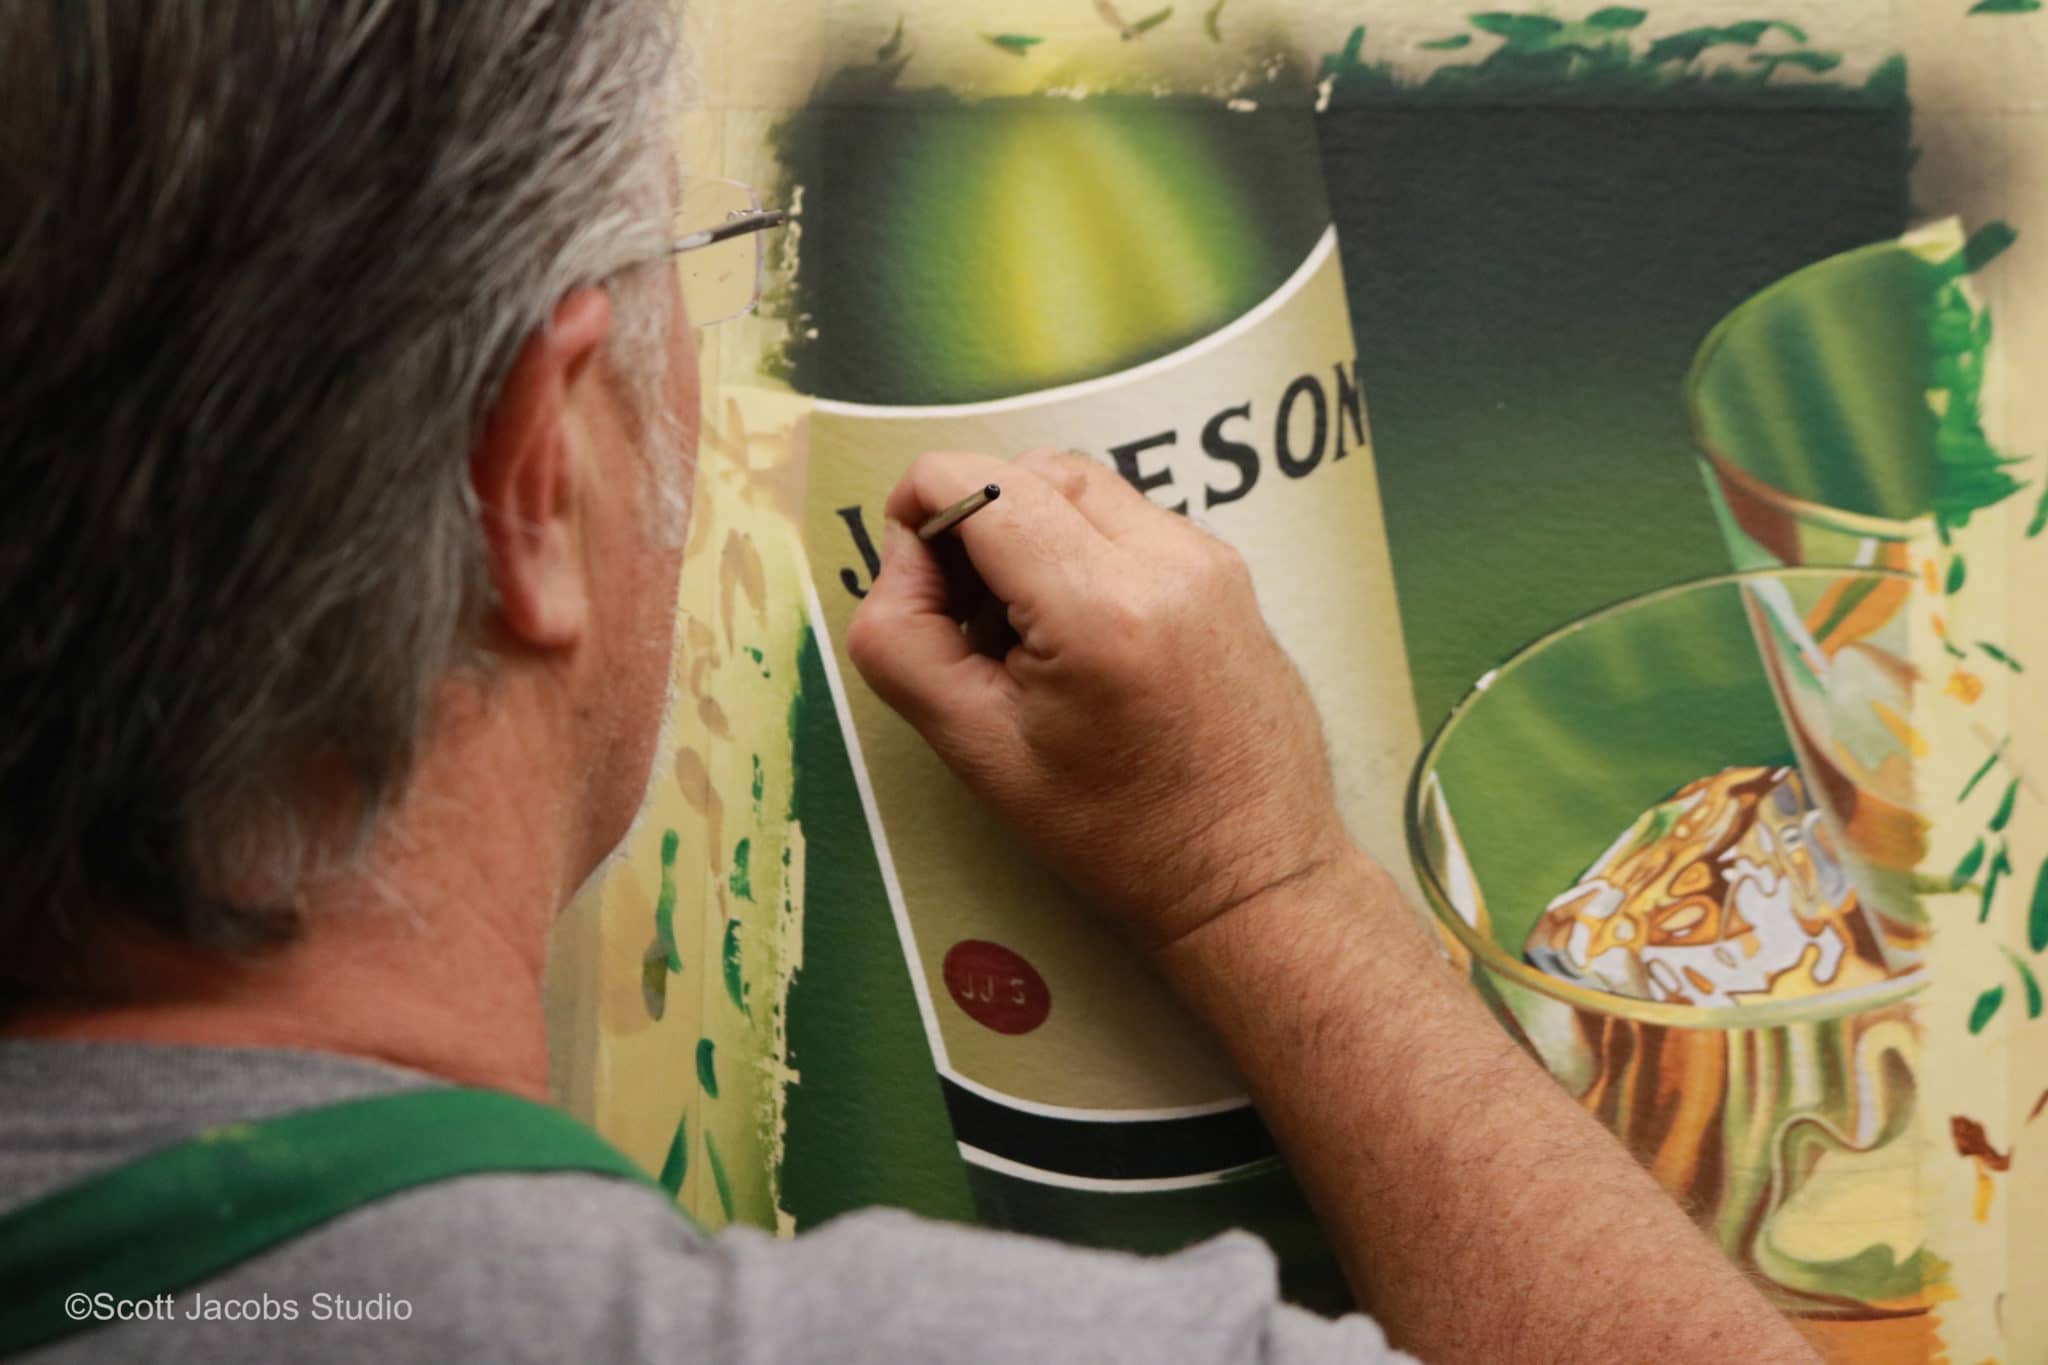 artist scott jacobs working on his Jameson whiskey painting